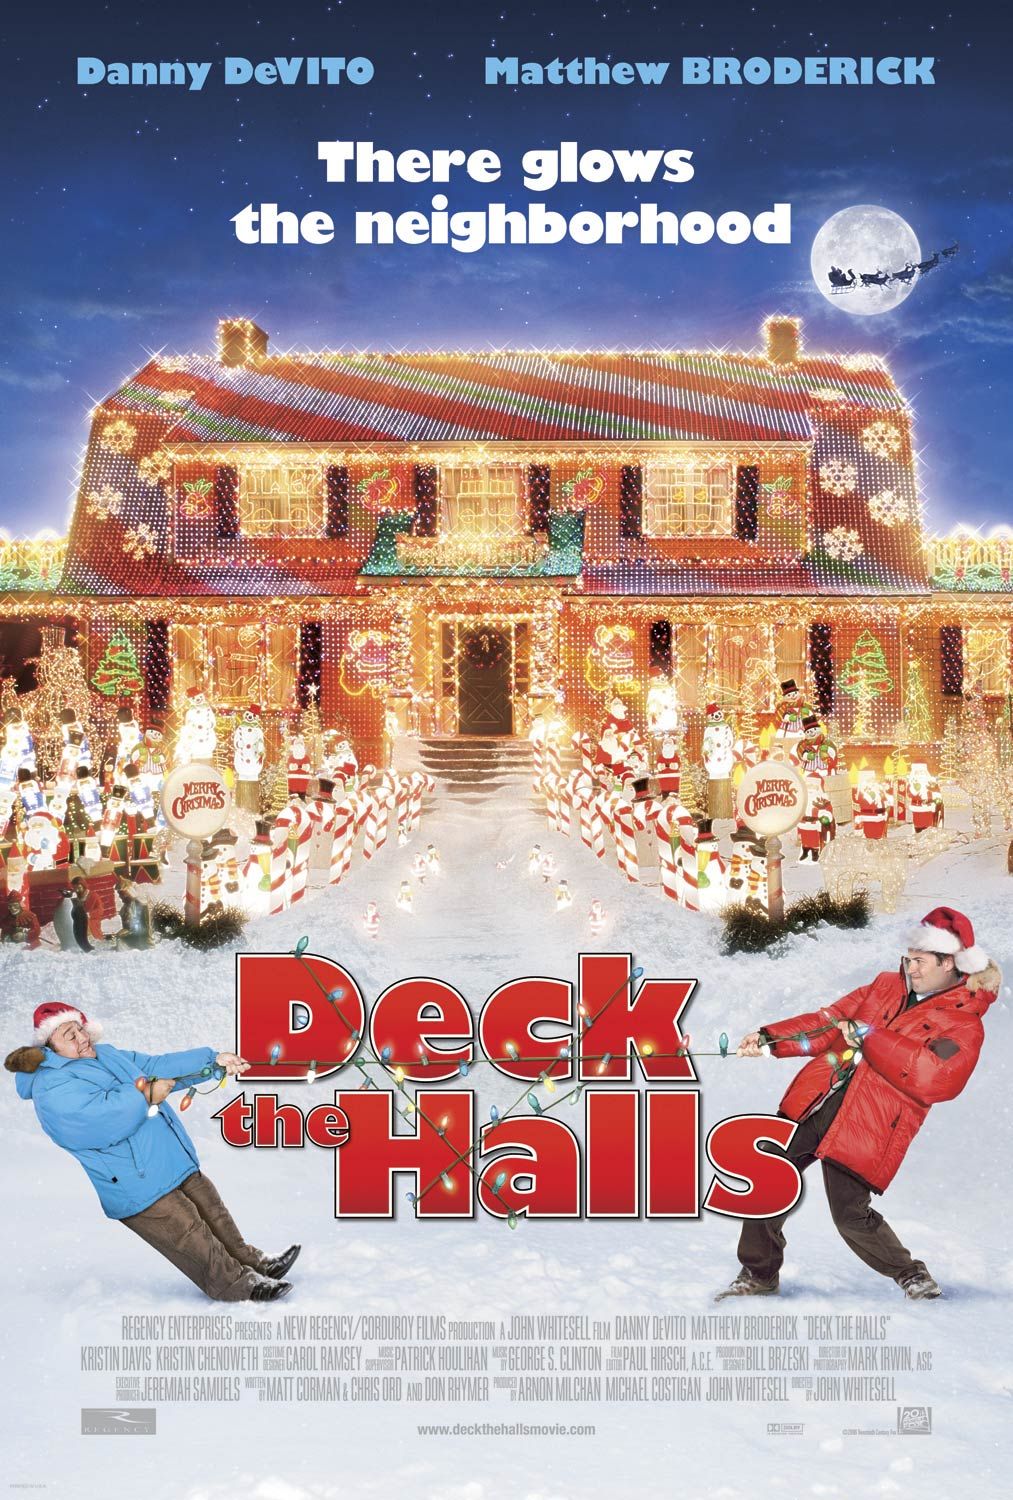 Deck the Halls (1 of 2) Extra Large Movie Poster Image IMP Awards